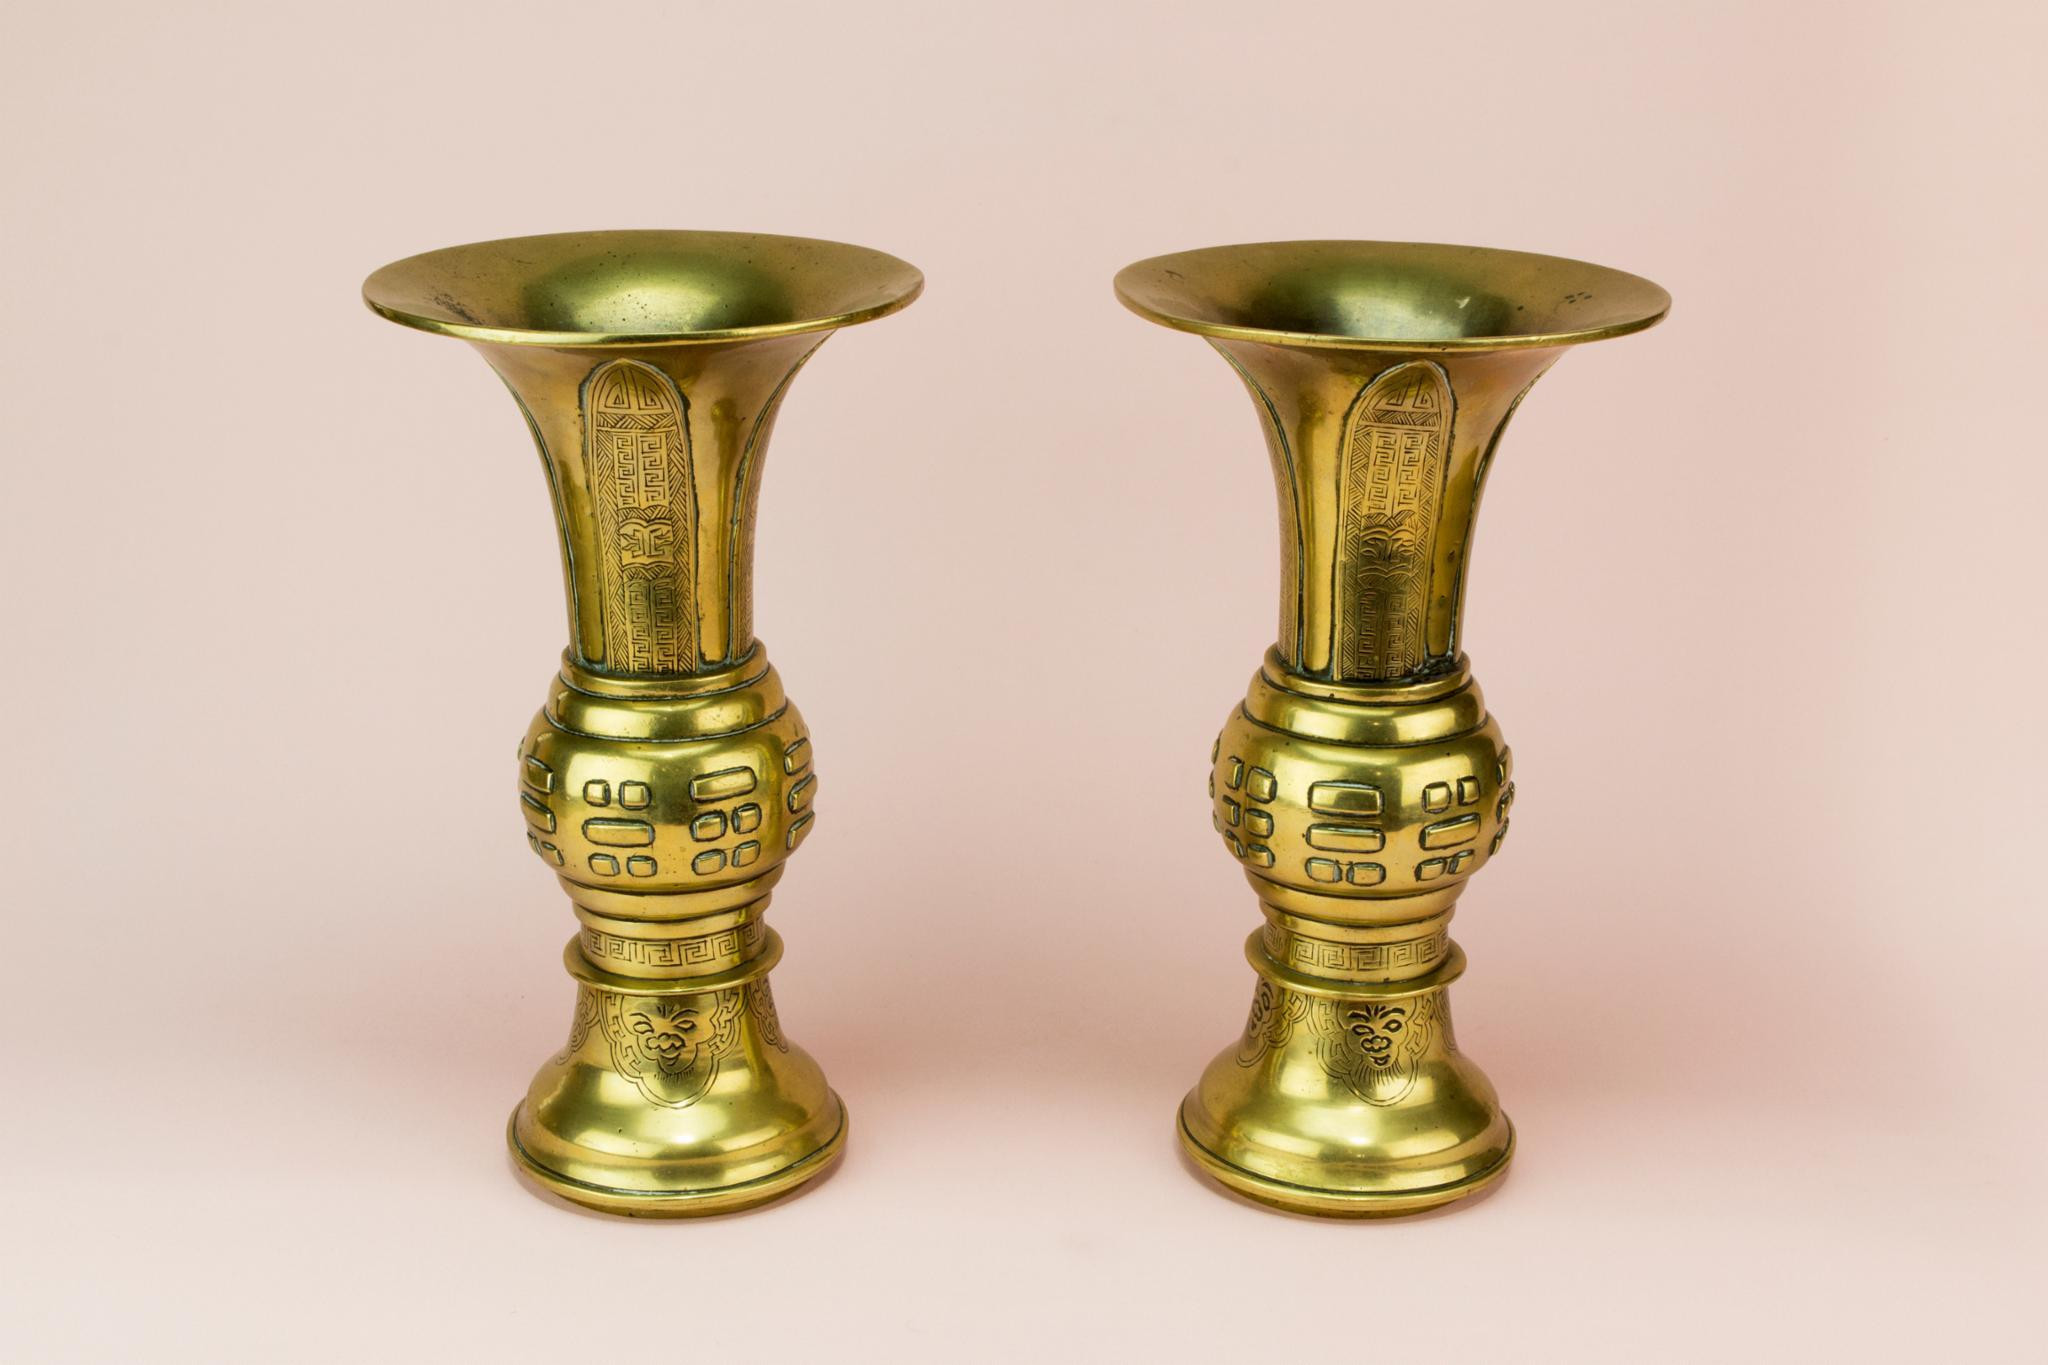 20 Cute Antique Brass Vase Made In India 2023 free download antique brass vase made in india of antique copper vase pictures 2 gu shaped brass vases chinese 19th regarding antique copper vase pictures 2 gu shaped brass vases chinese 19th century late